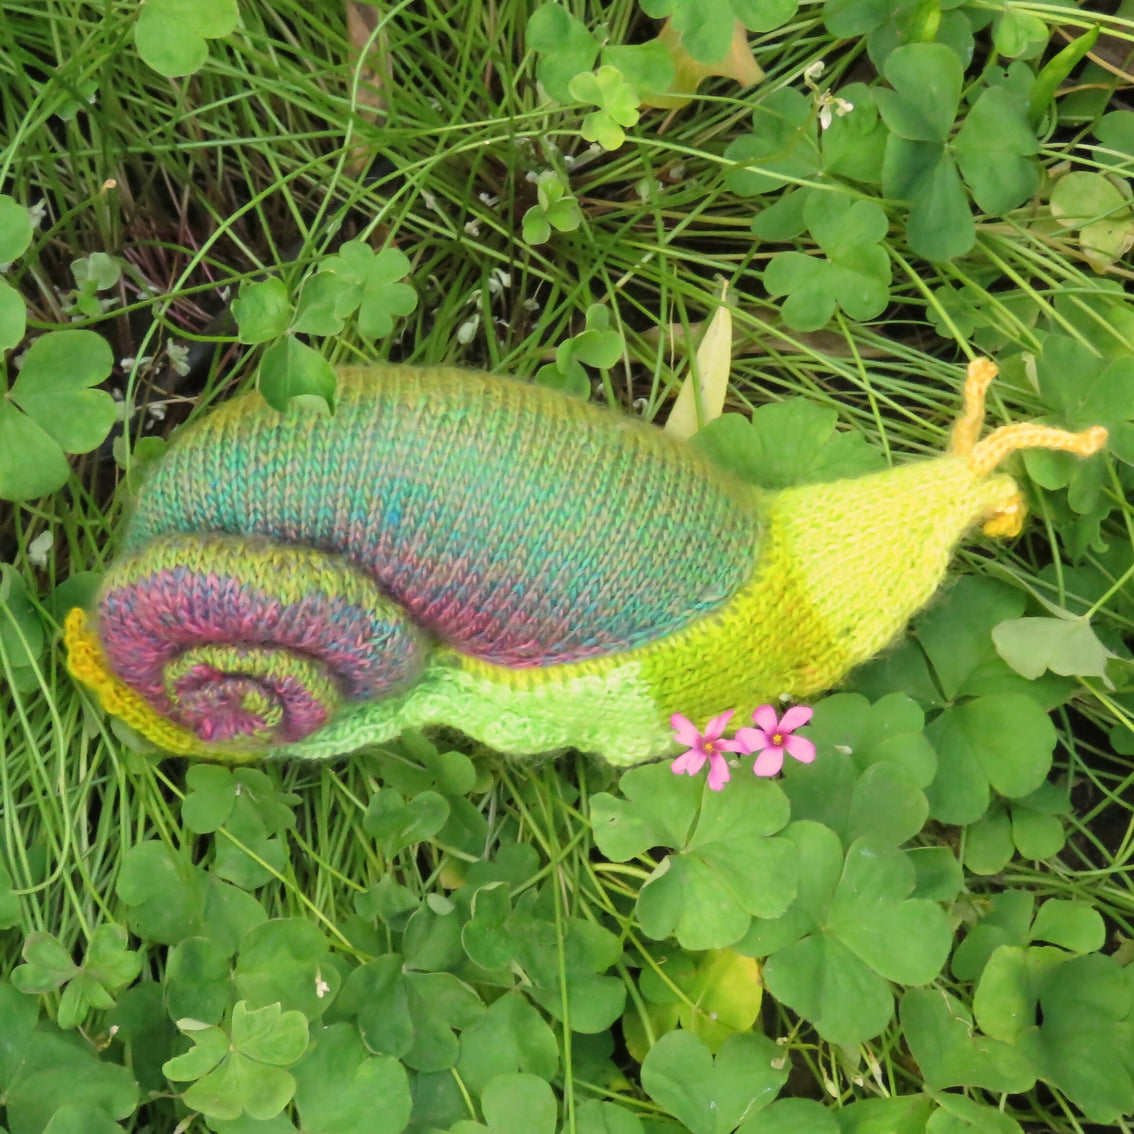 A hand-knit snail stuffed animal in shades of green and purple wool on a bed of moss